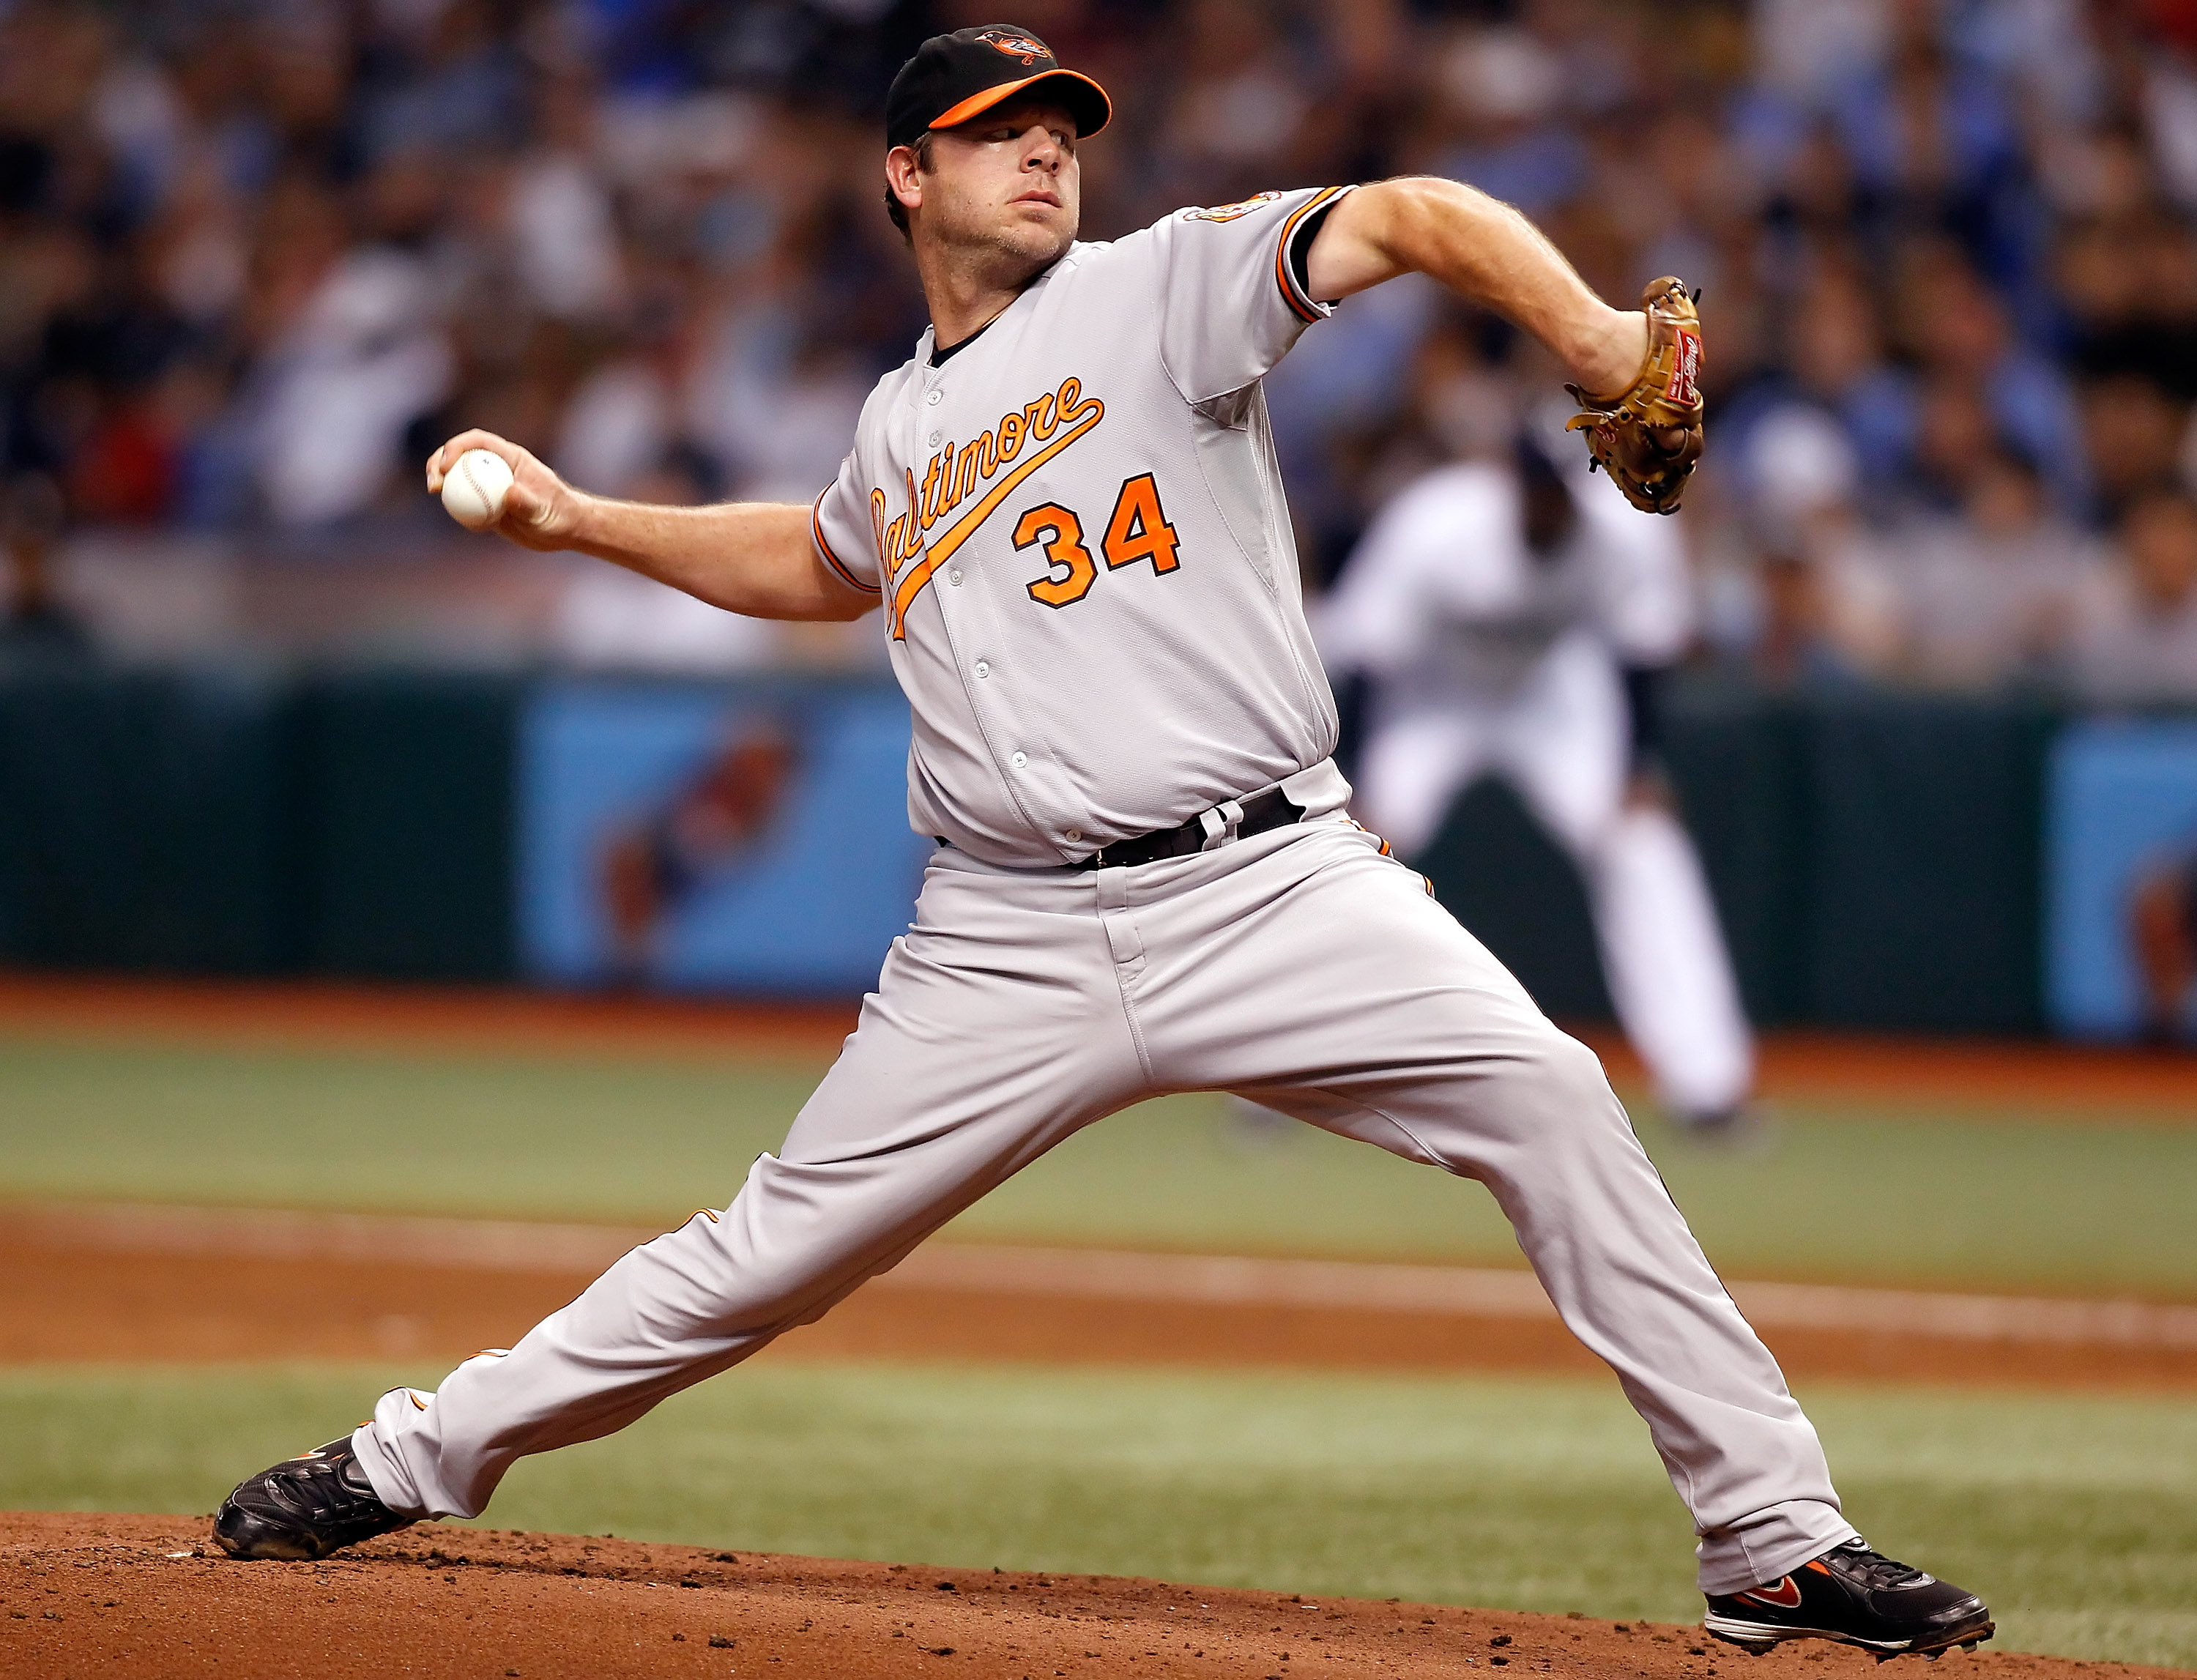 ST. PETERSBURG, FL - SEPTEMBER 29:  Pitcher Kevin Millwood #34 of the Baltimore Orioles pitches against the Tampa Bay Rays during the game at Tropicana Field on September 29, 2010 in St. Petersburg, Florida.  (Photo by J. Meric/Getty Images)